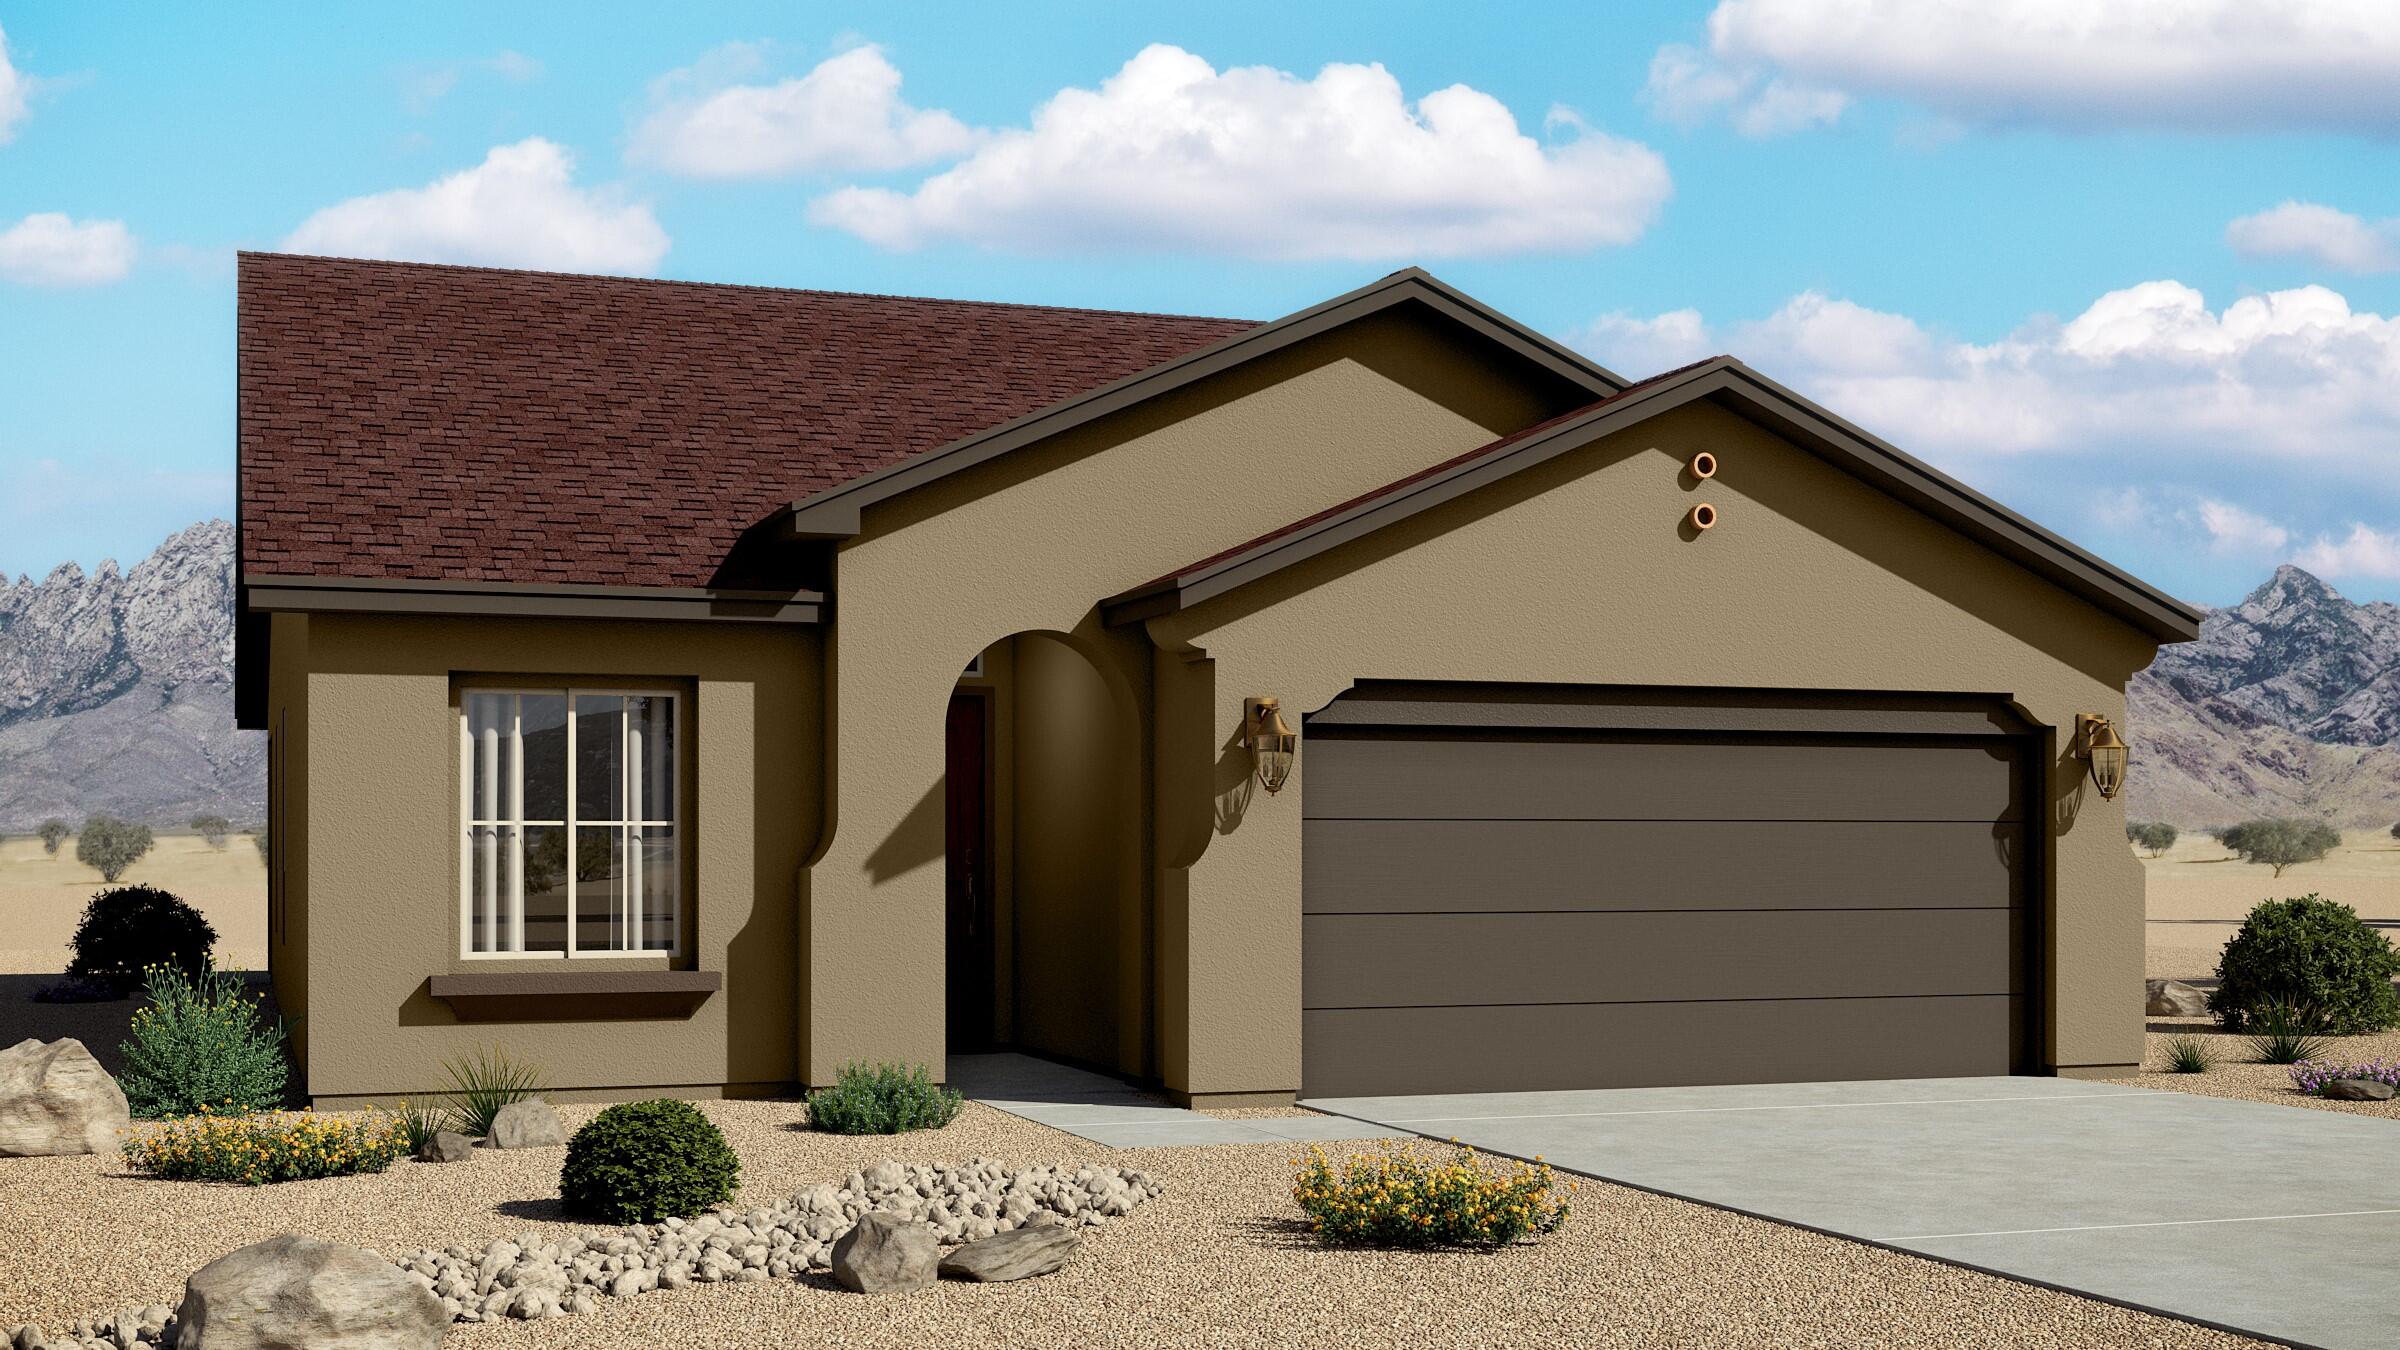 This home design features 3 bedrooms, 2 bathrooms, 2 car garage with a welcoming entry that opens to a bright, elegant dining room. The kitchen-dining-great room configuration is ideal for family living or festive gathering. Home is still under construction.